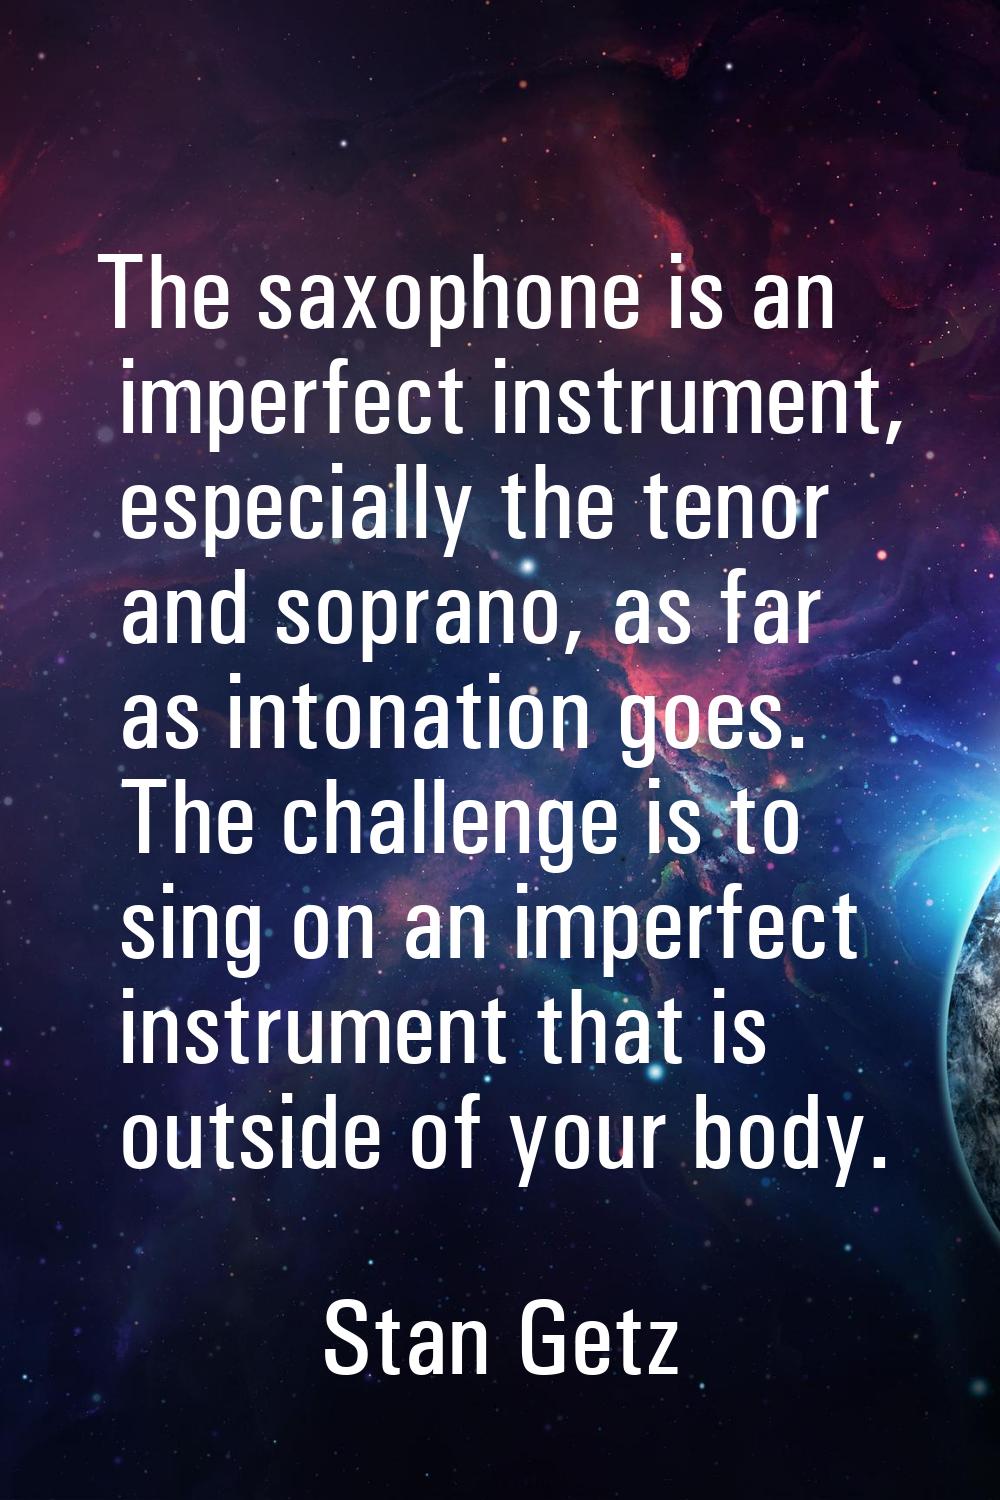 The saxophone is an imperfect instrument, especially the tenor and soprano, as far as intonation go